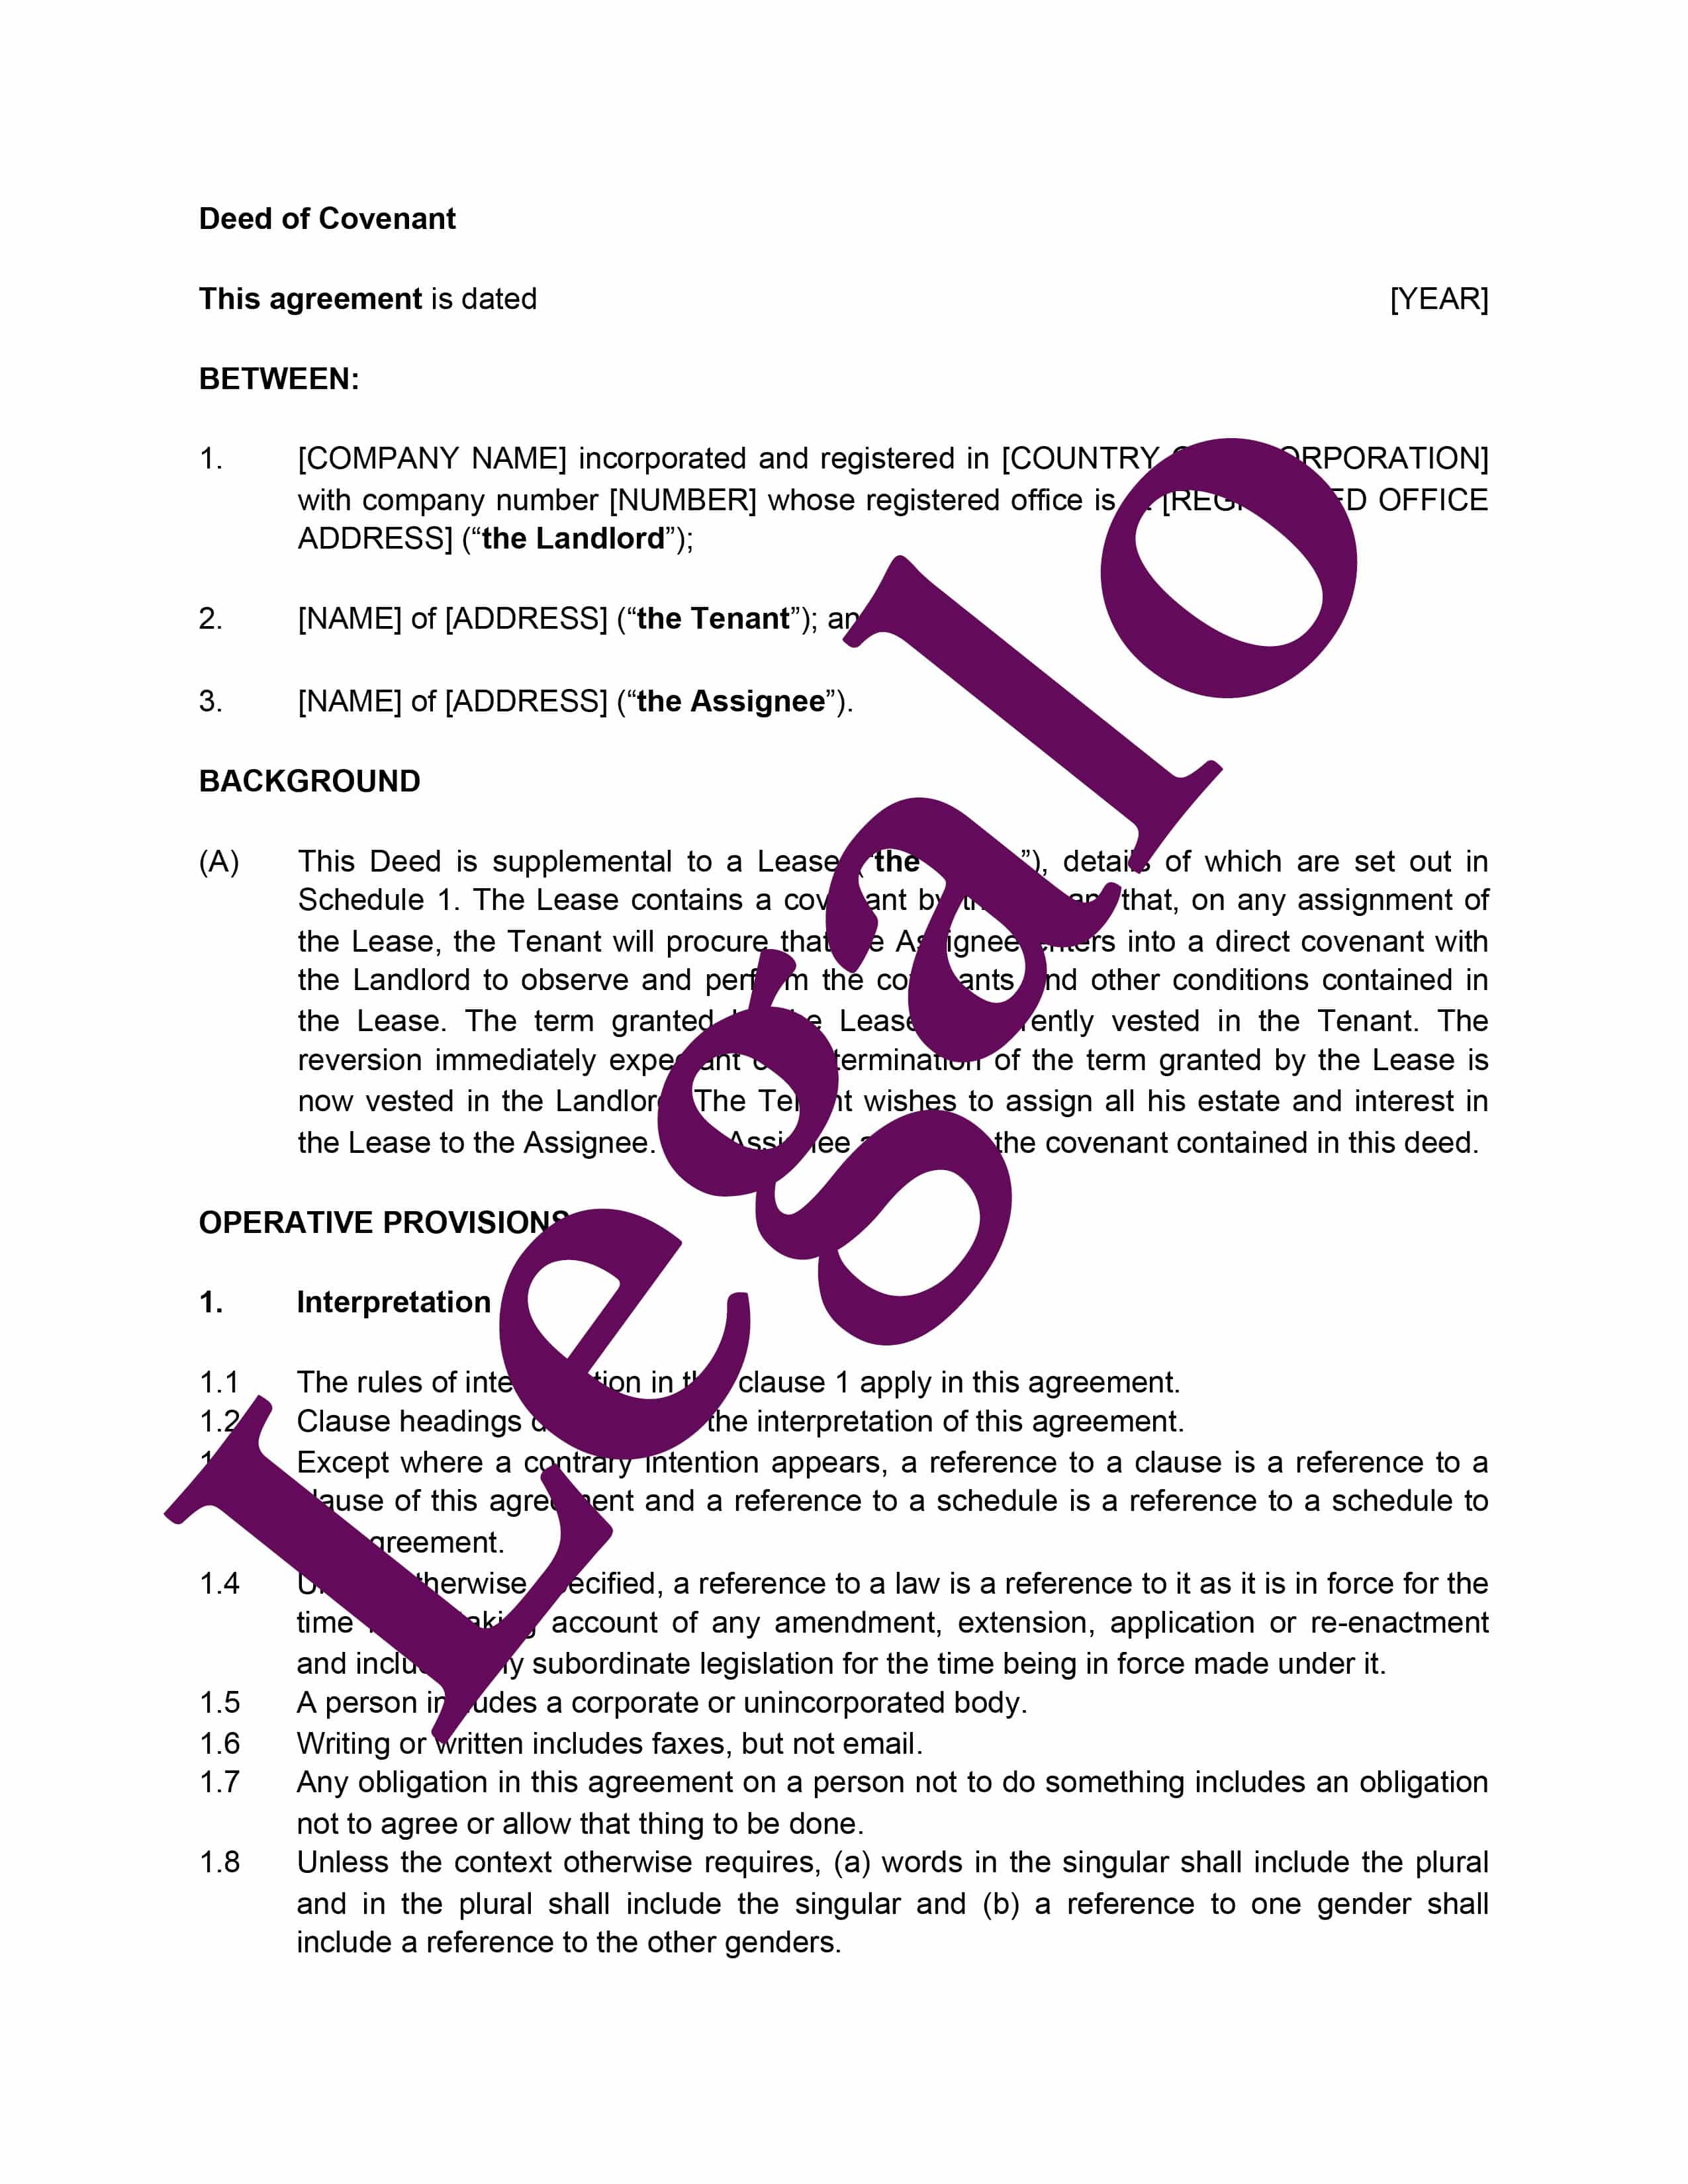 deed of covenant assignment of lease